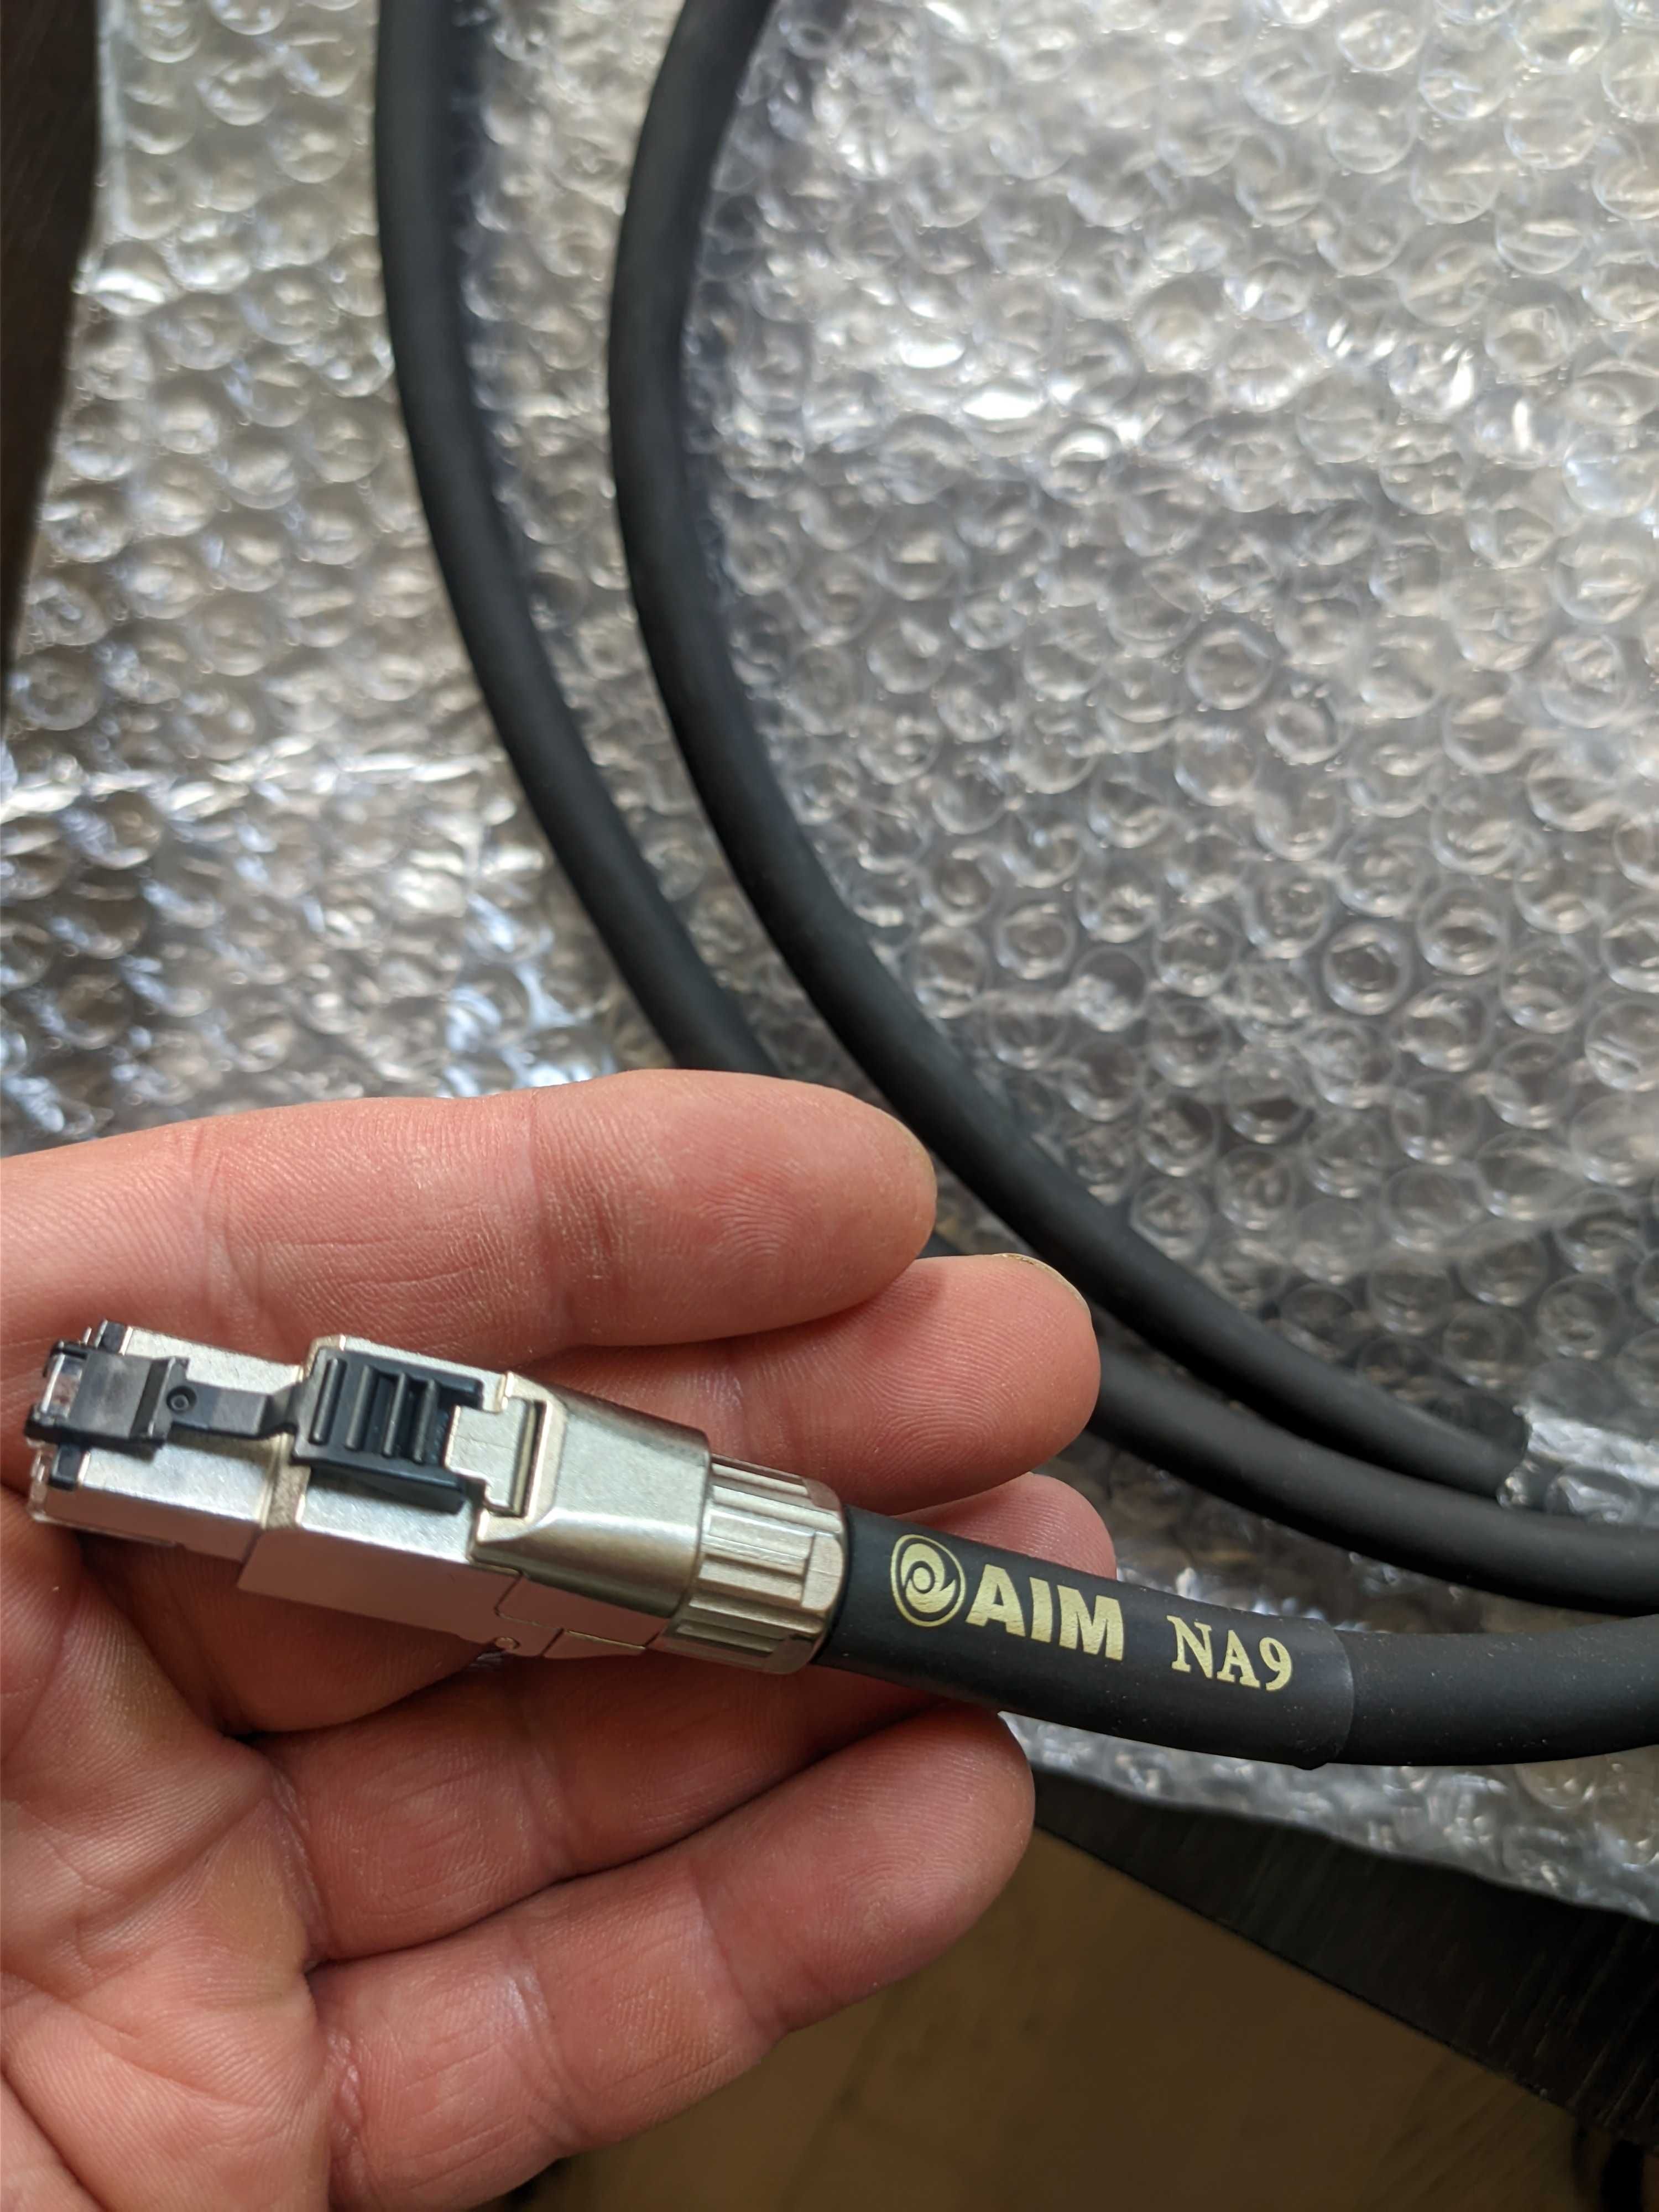 A.I.M. Audio LAN Cable NA9-020